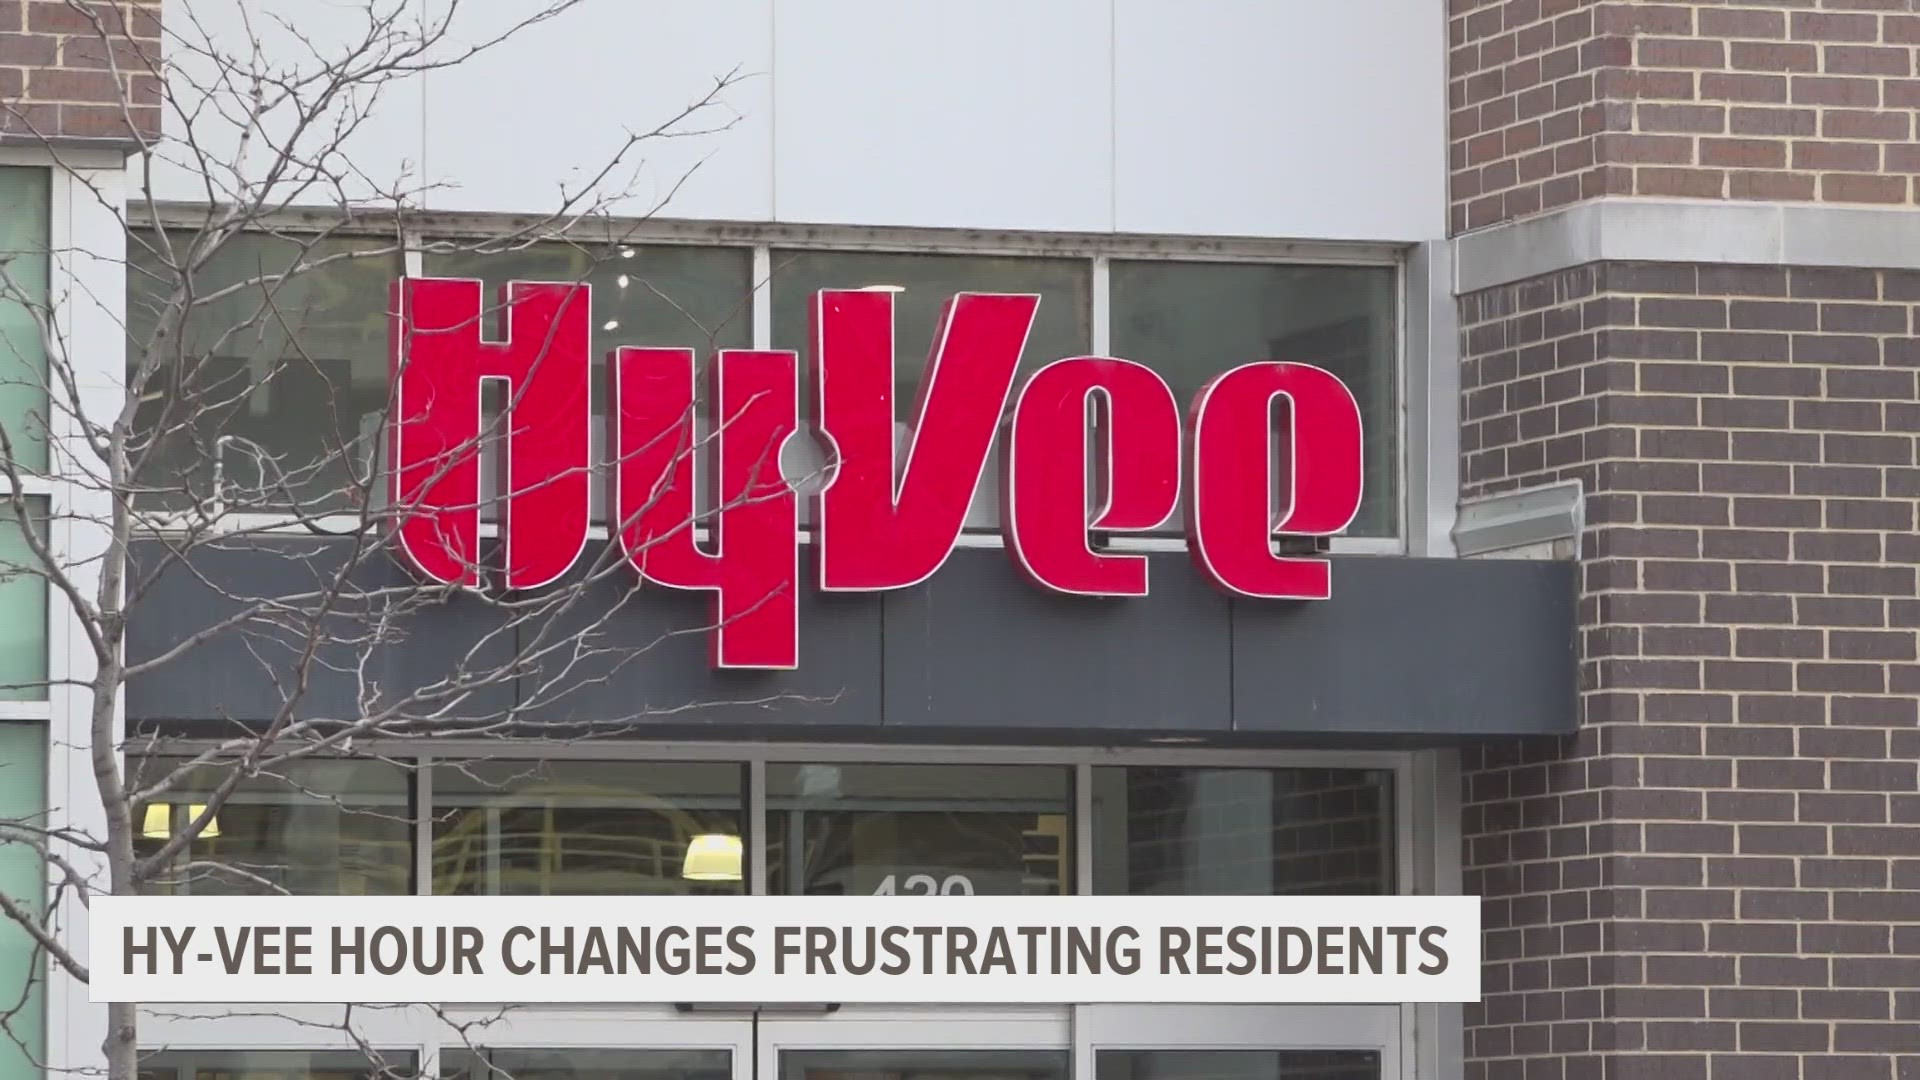 A Hy-Vee spokesperson told Local 5 that since the pandemic, the number of customers they serve during the evening hours has significantly decreased.